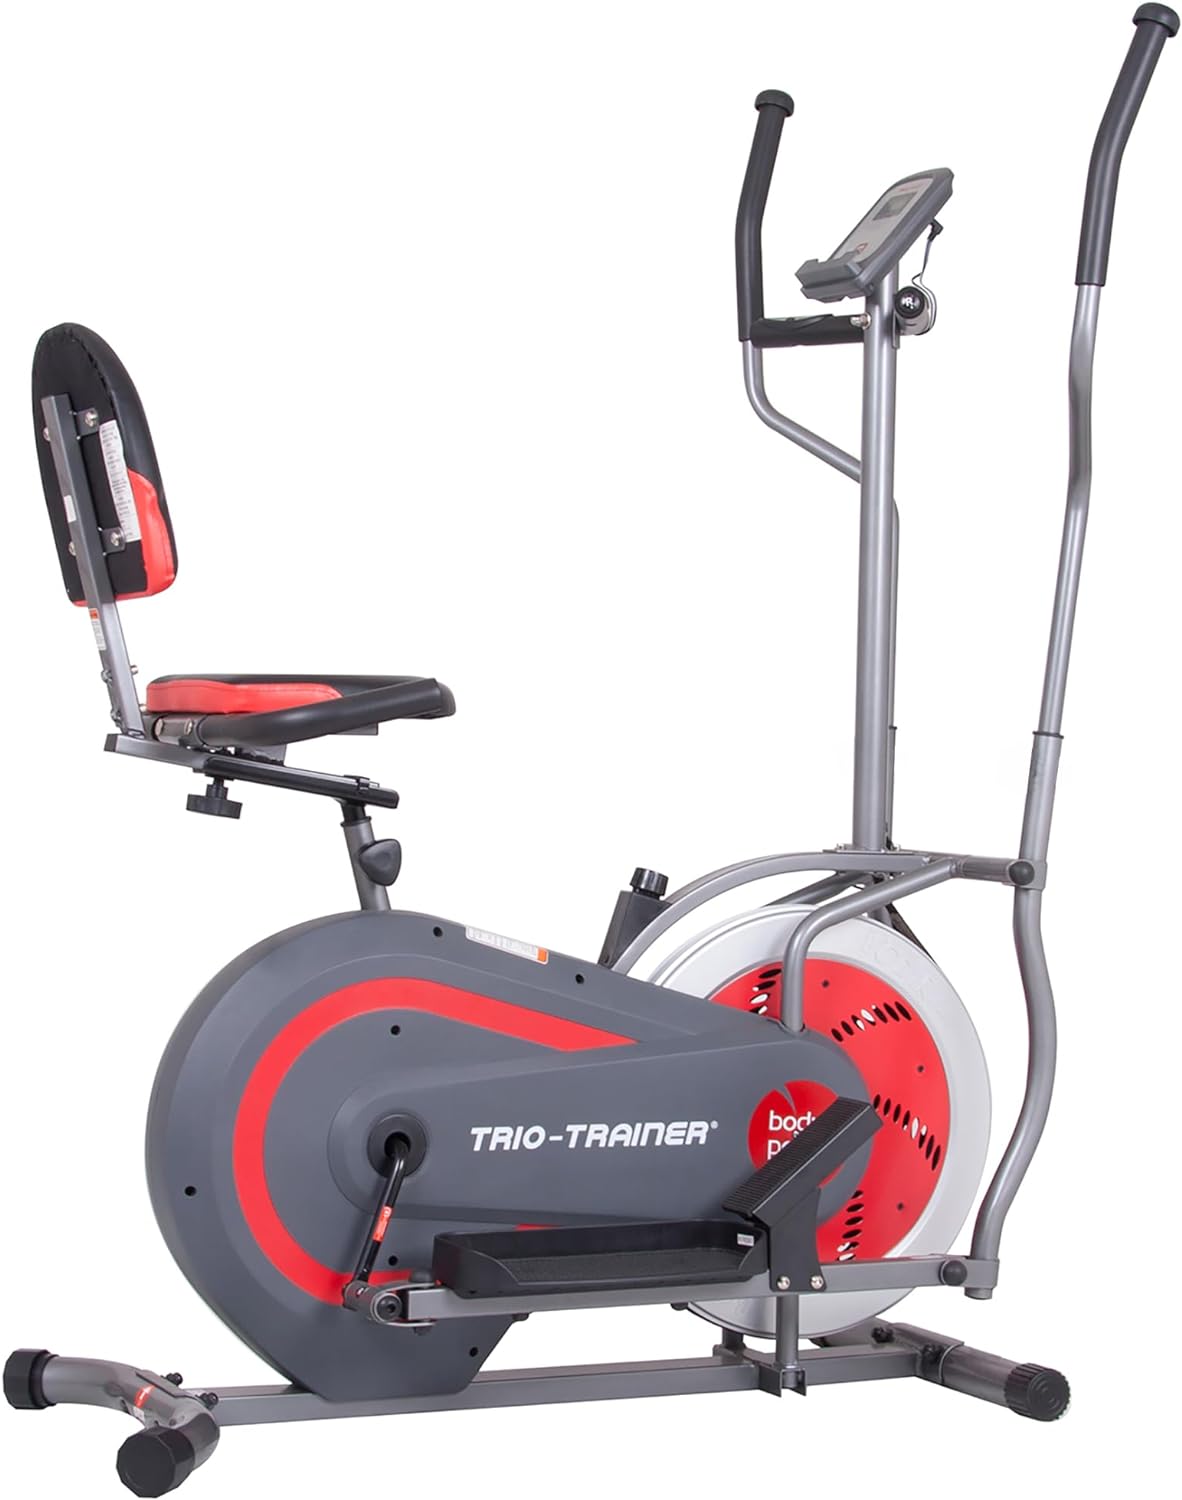 This is a quality machine. I recommend it over just an elliptical because it gives you the chance to sit and pedal when your thighs are burning. That being said, you get what you pay for. It is all mechanical so yes it' a little noisy, There is a belt that spins around a wheel. Not recommended for the upper level of an apartment building but it' fine for the user. This machine is not for a large person. I am 57, 170. Anything much more than that I can feel it would be unstable. Also, I wear 